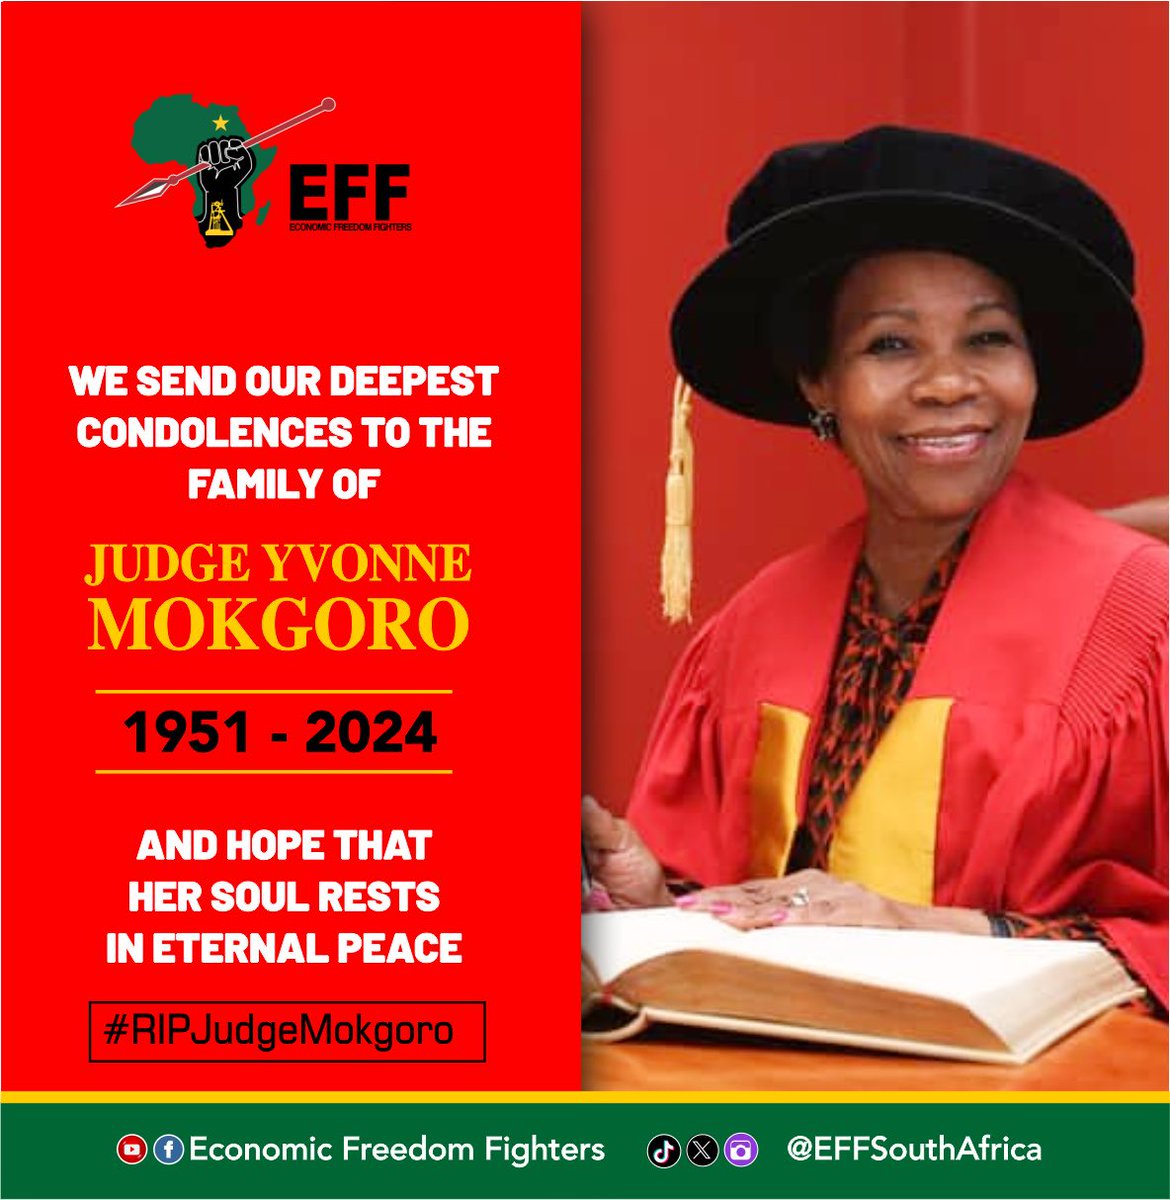 The EFF sends its heartfelt condolences to the family, friends and colleagues of Judge Yvonne Mokgoro. The Economic Emancipation Movement salutes you. May your soul rest in revolutionary peace.